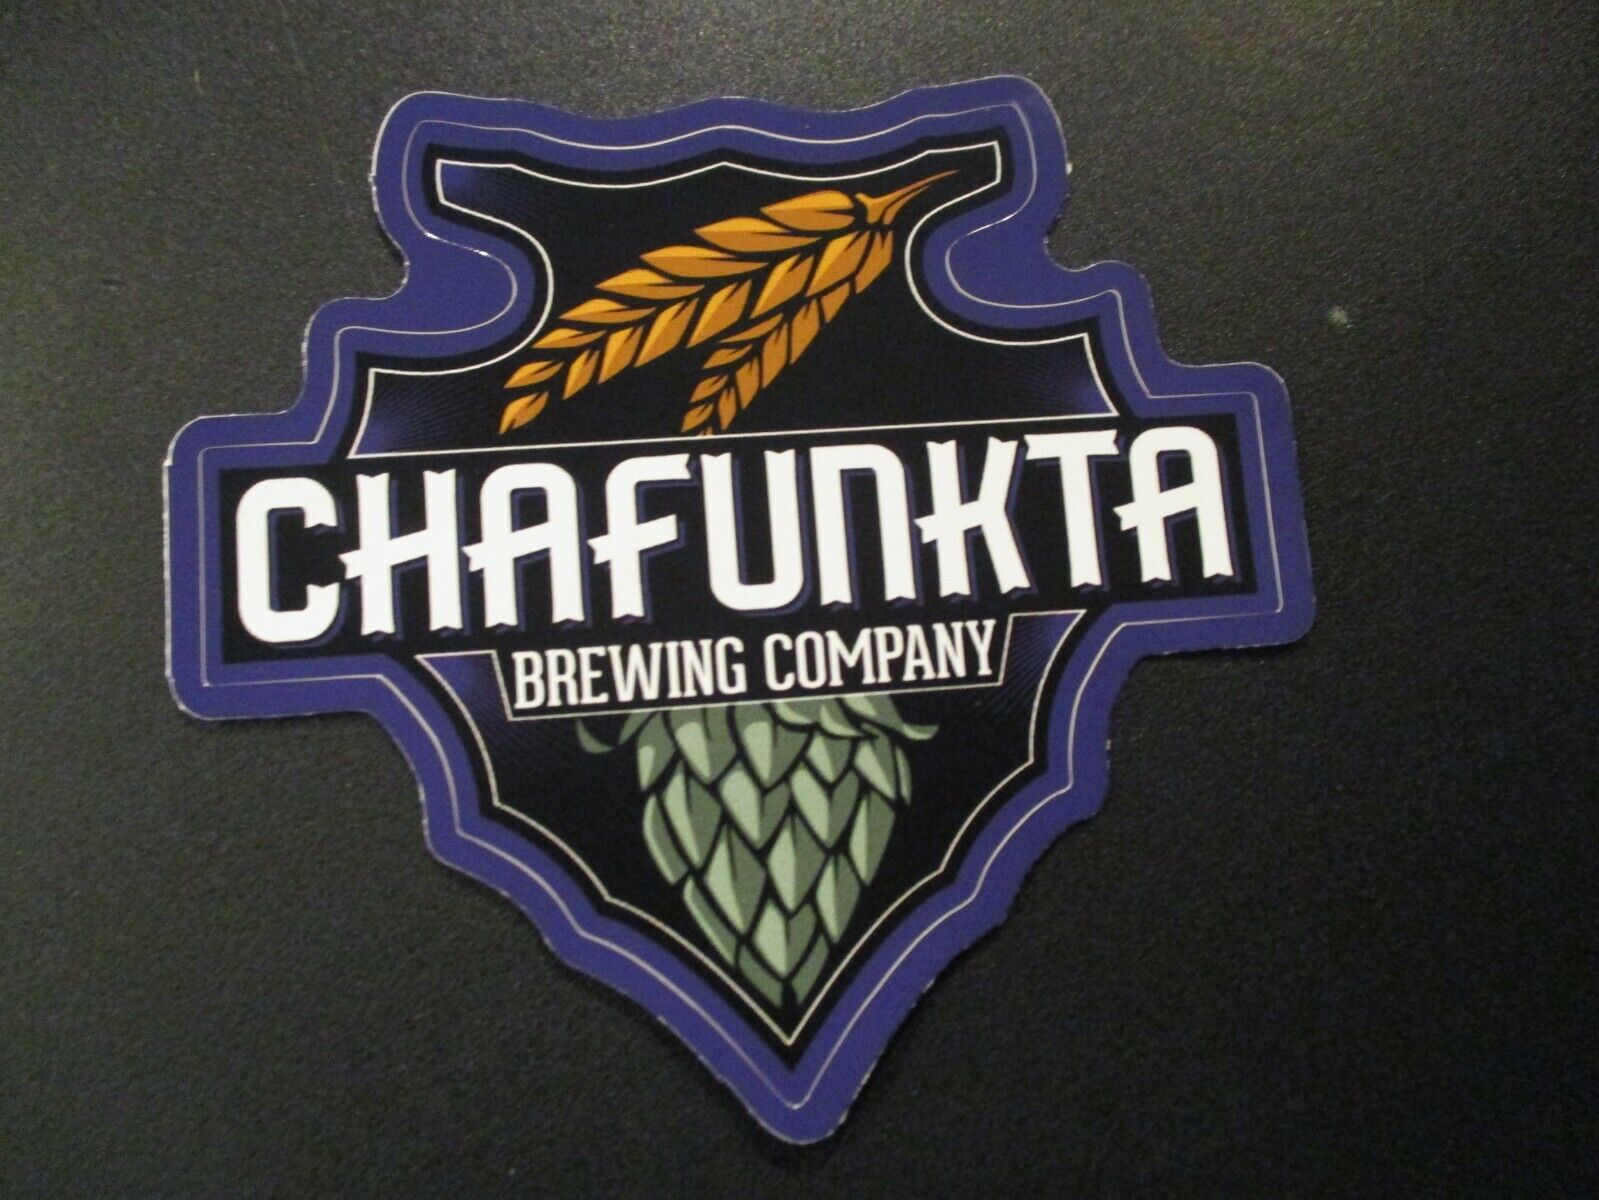 CHAFUNKTA BREWING Louisiana Old 504 Kingfish STICKER decal craft beer brewery